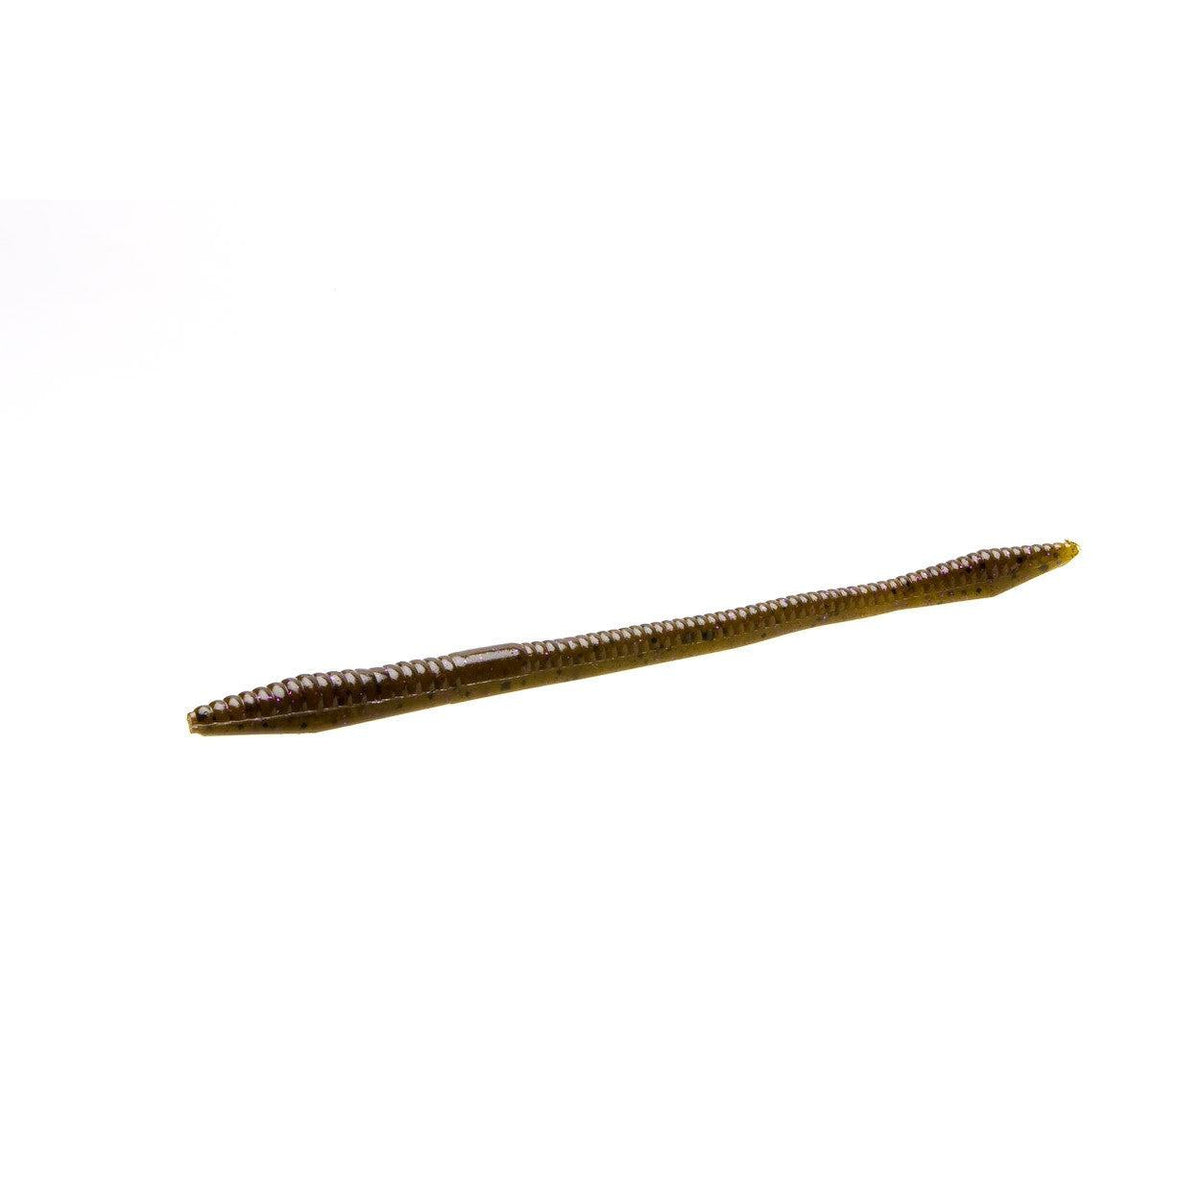 Zoom Finesse Worm 4 3/4